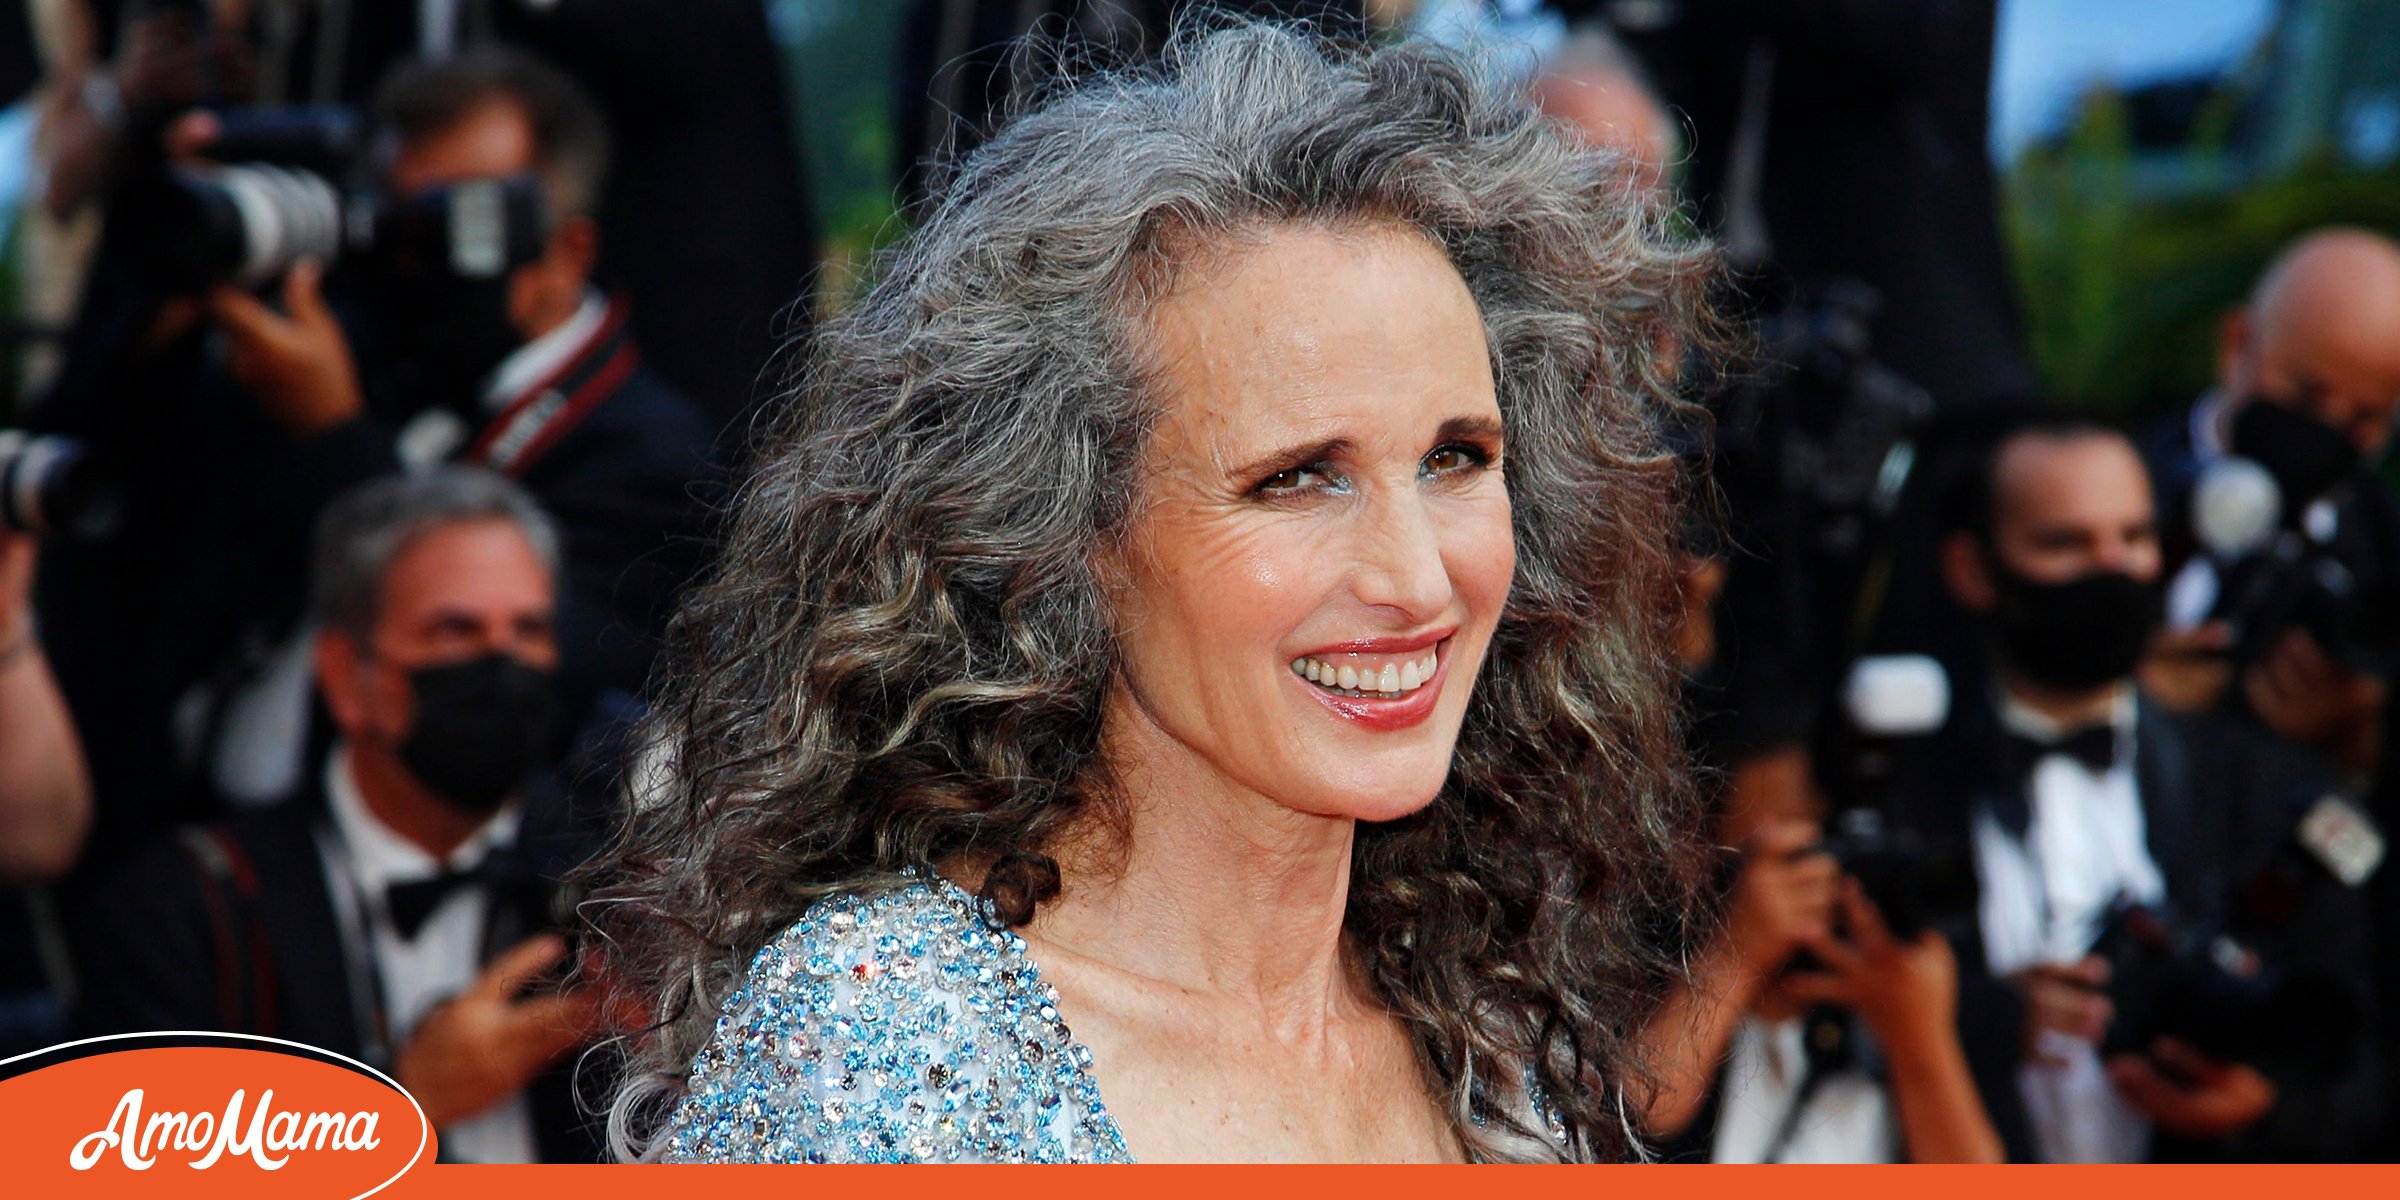 Andie MacDowell’s relationship with her first husband, Paul Qualley